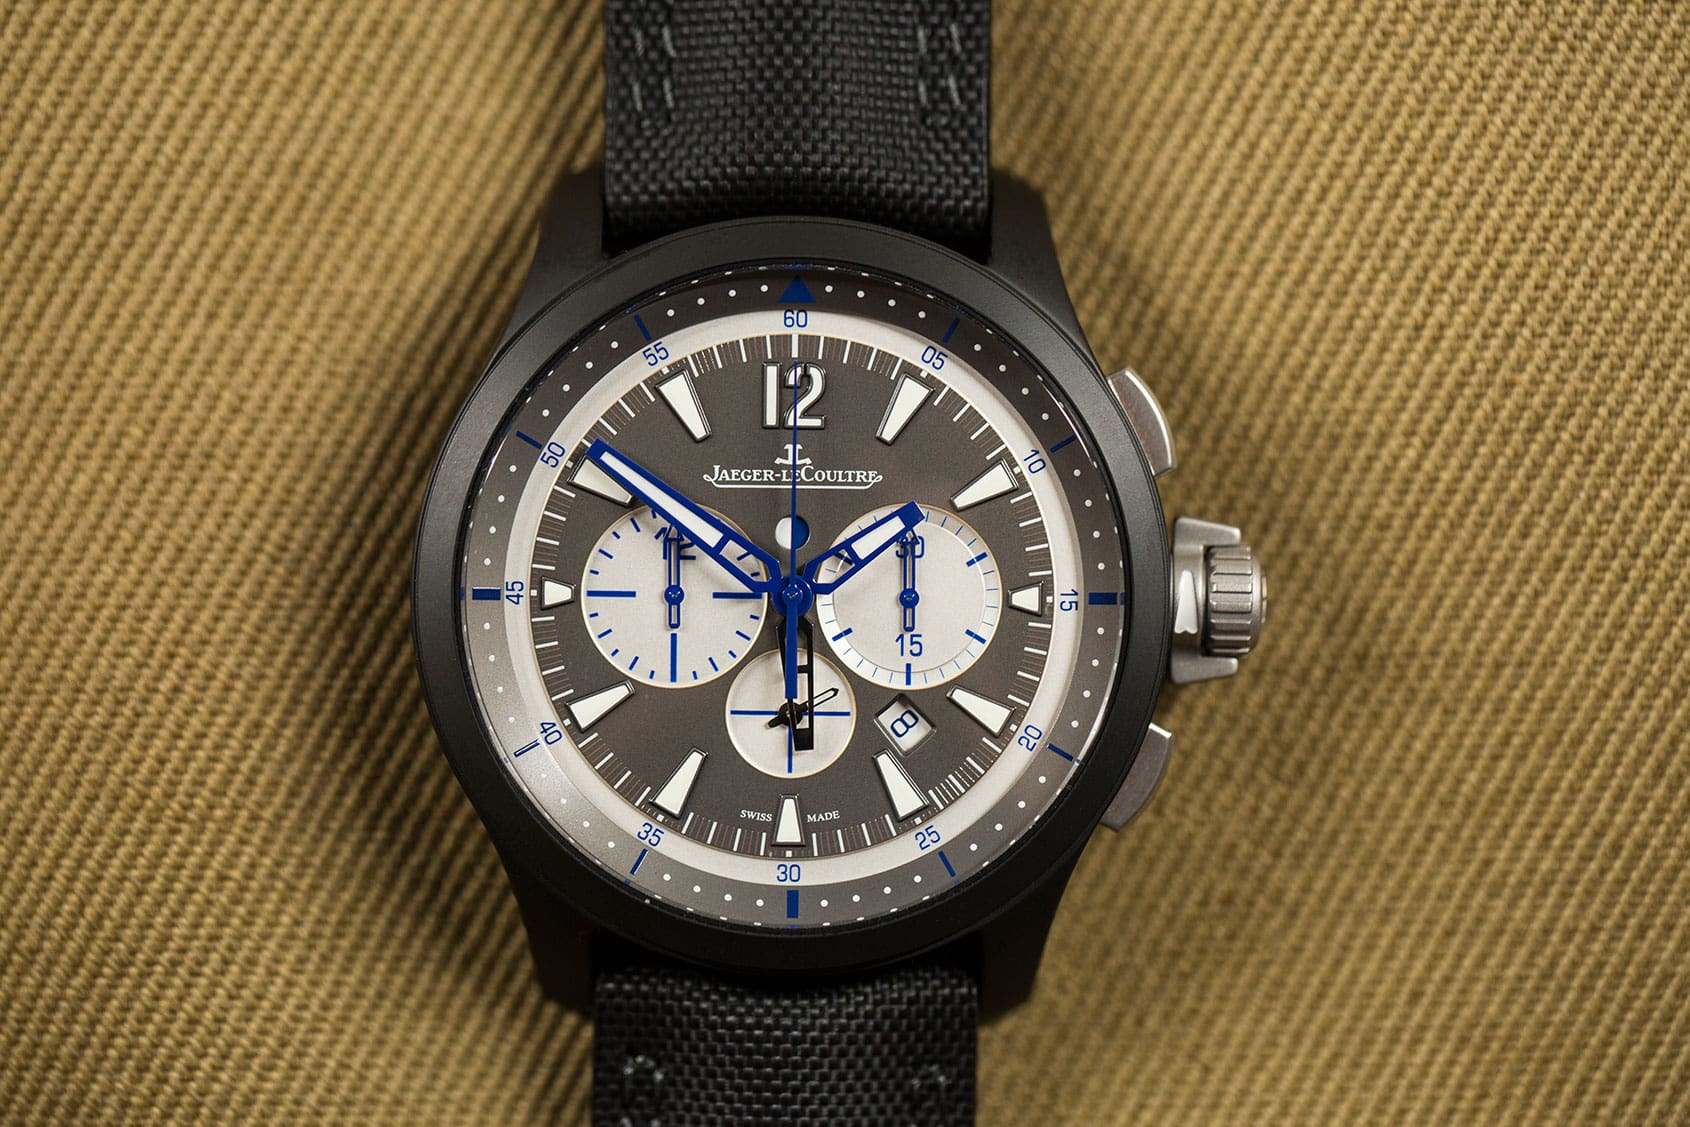 JLC’s Master Compressor Chronograph Ceramic is the definition of tacticool